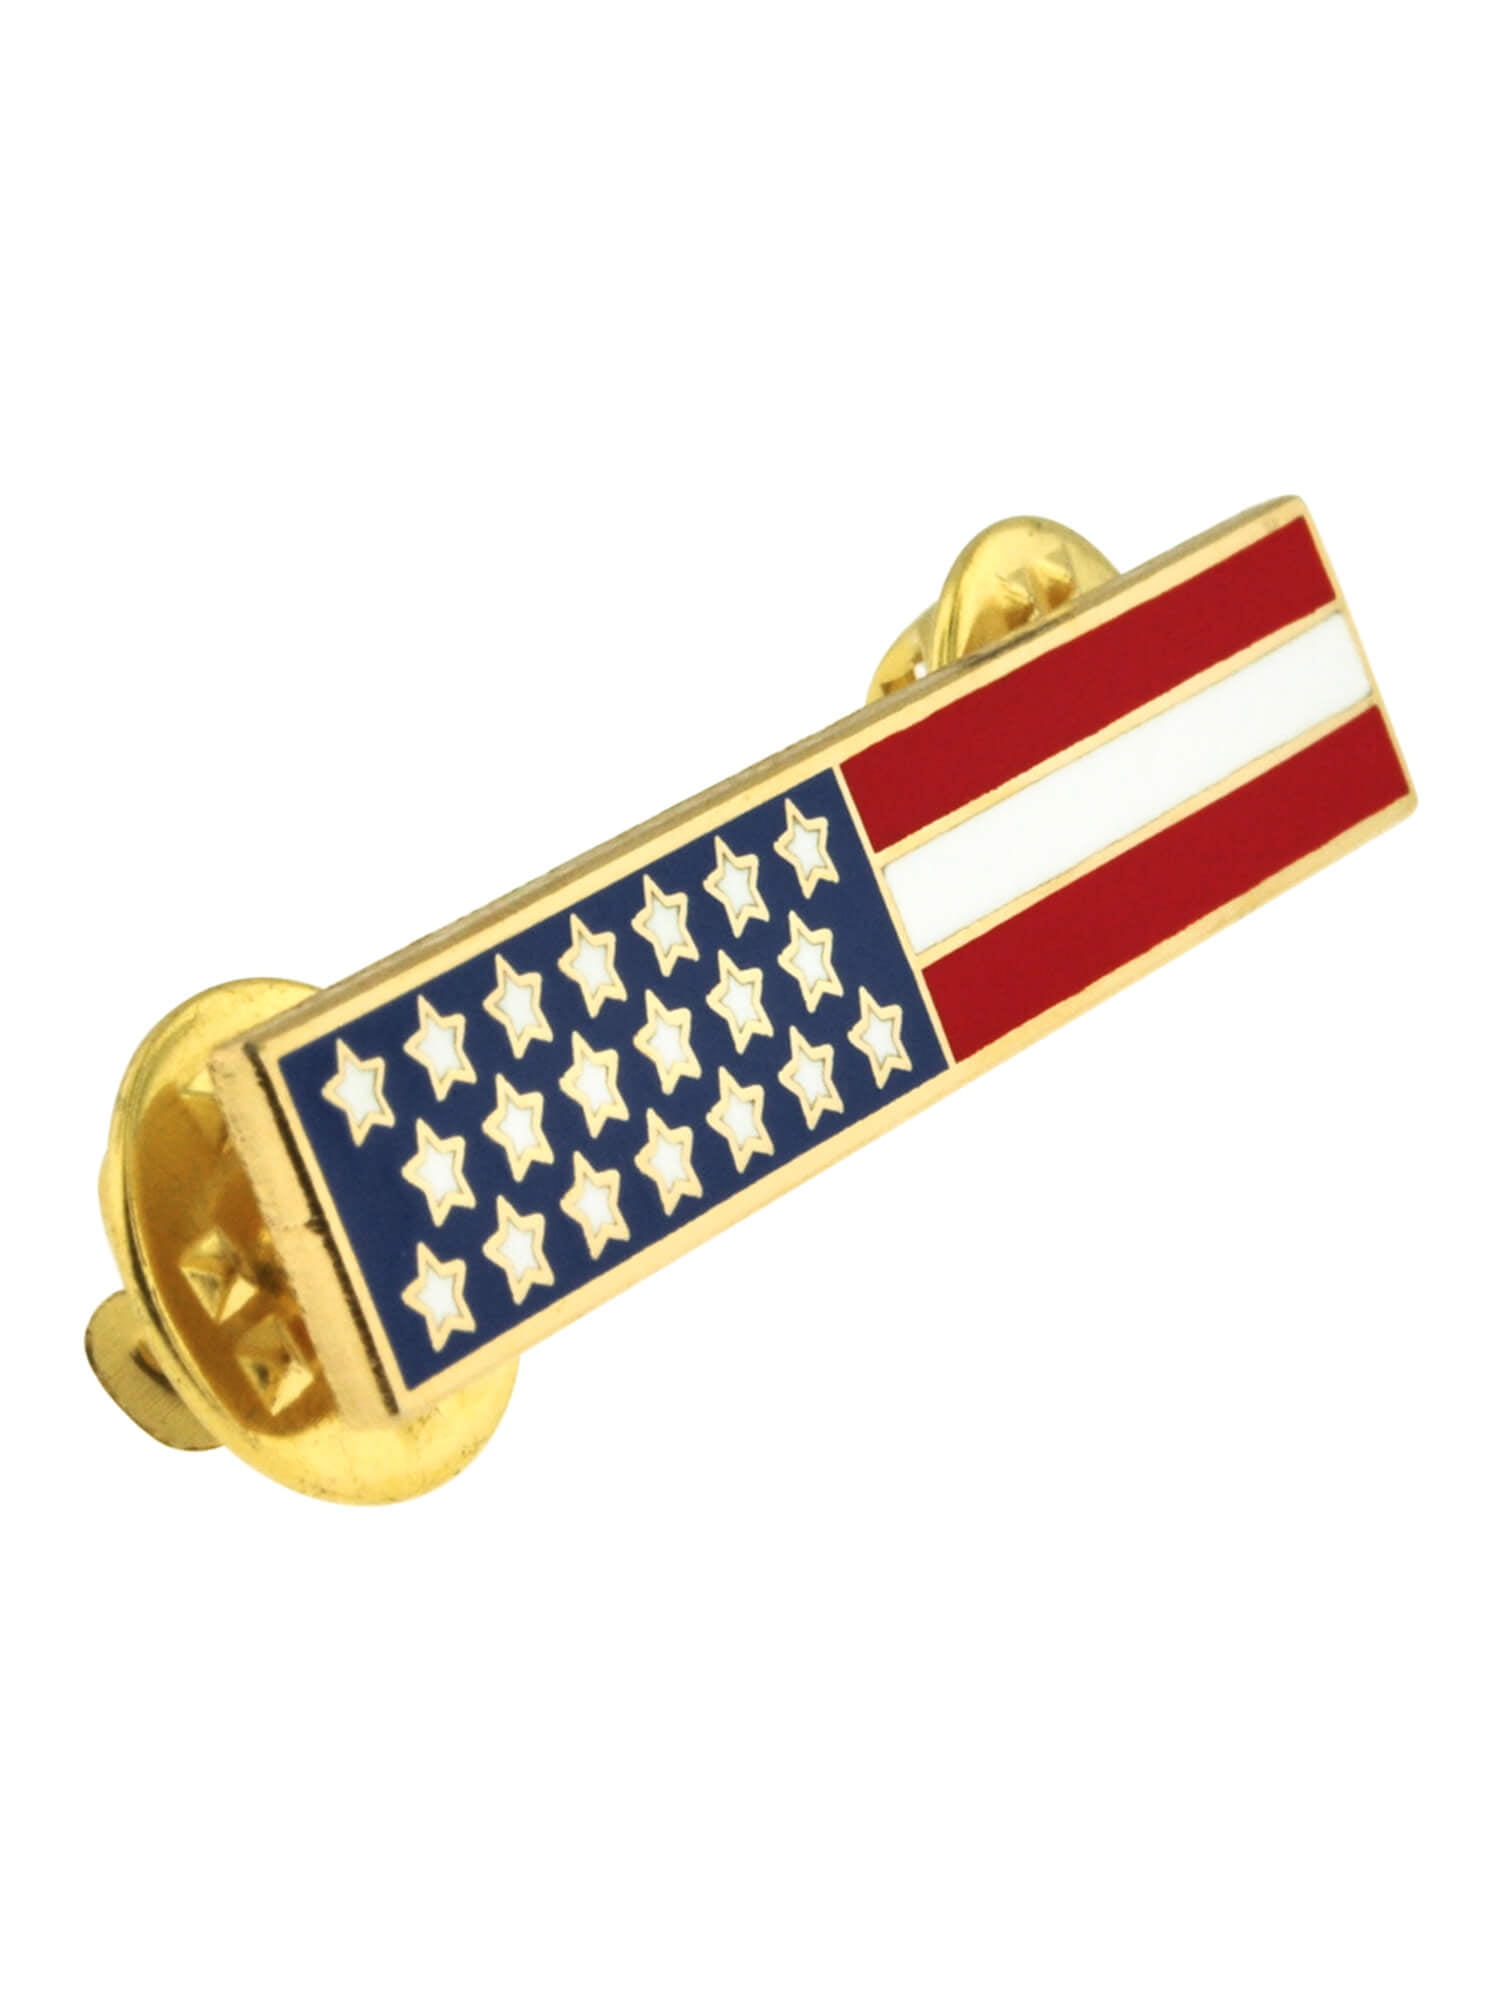 American Flag Lapel Pin - Shirt - Suit - Hat Pin - Agent Gear USA